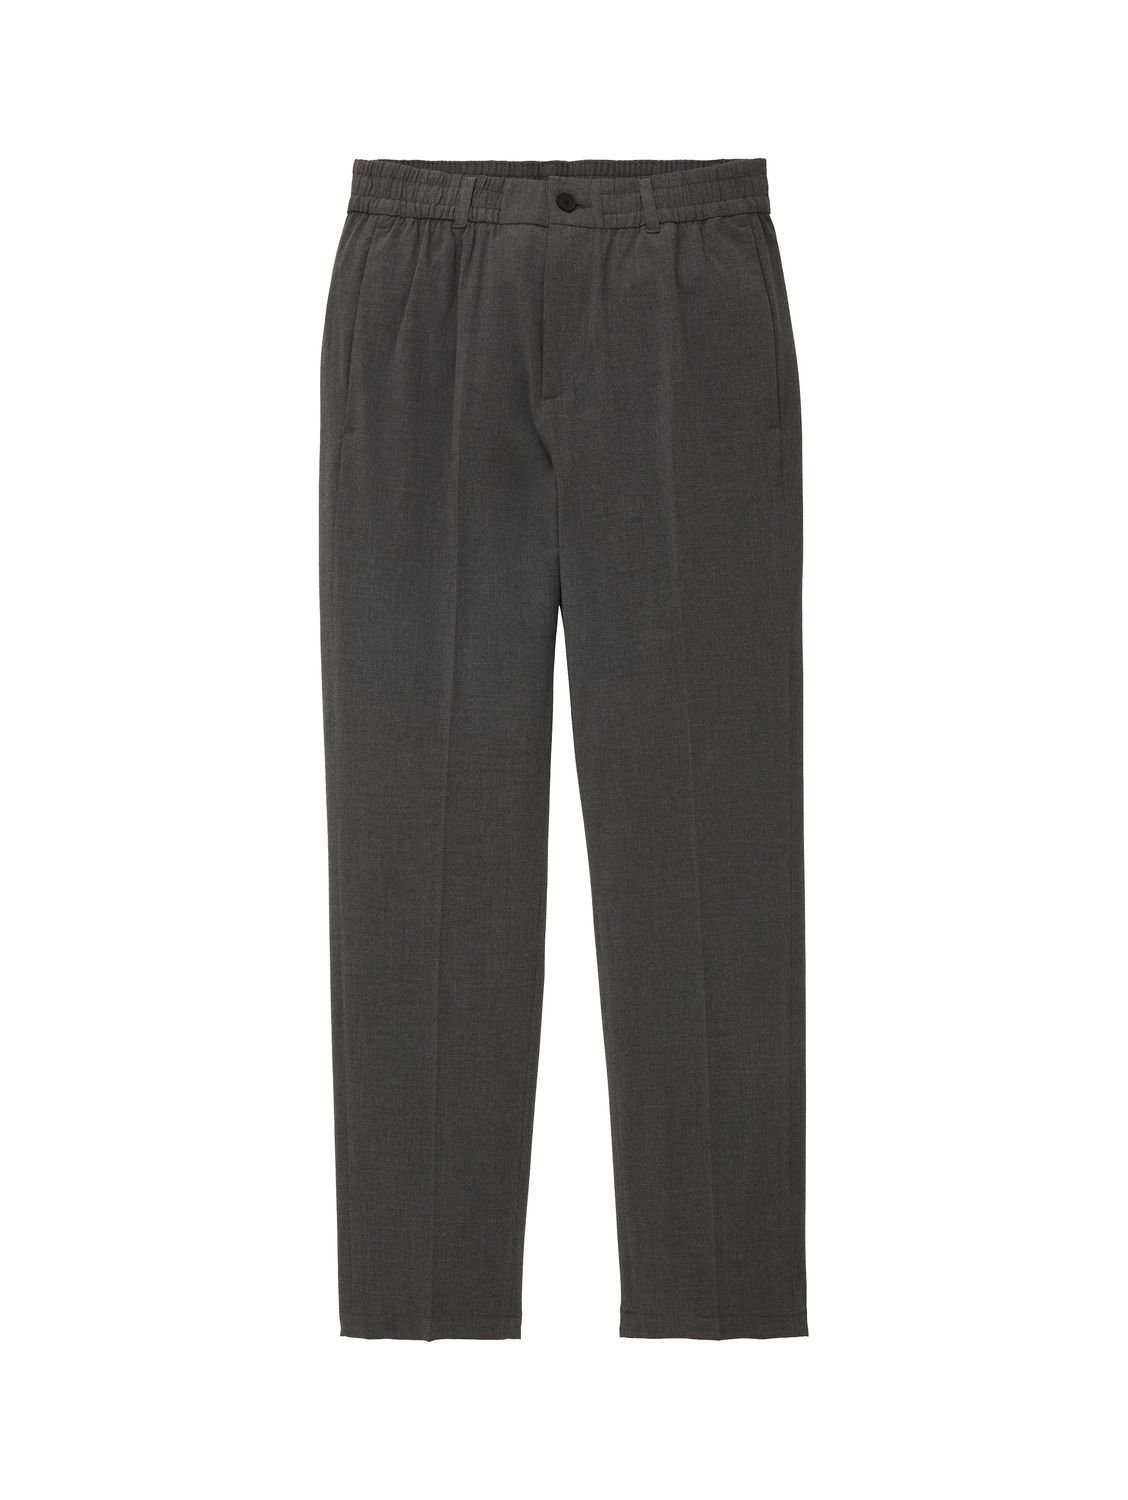 RELAXED Stretch Melange Mid mit Grey TOM CHINO Denim 10775 TAILOR Chinohose TAPERED